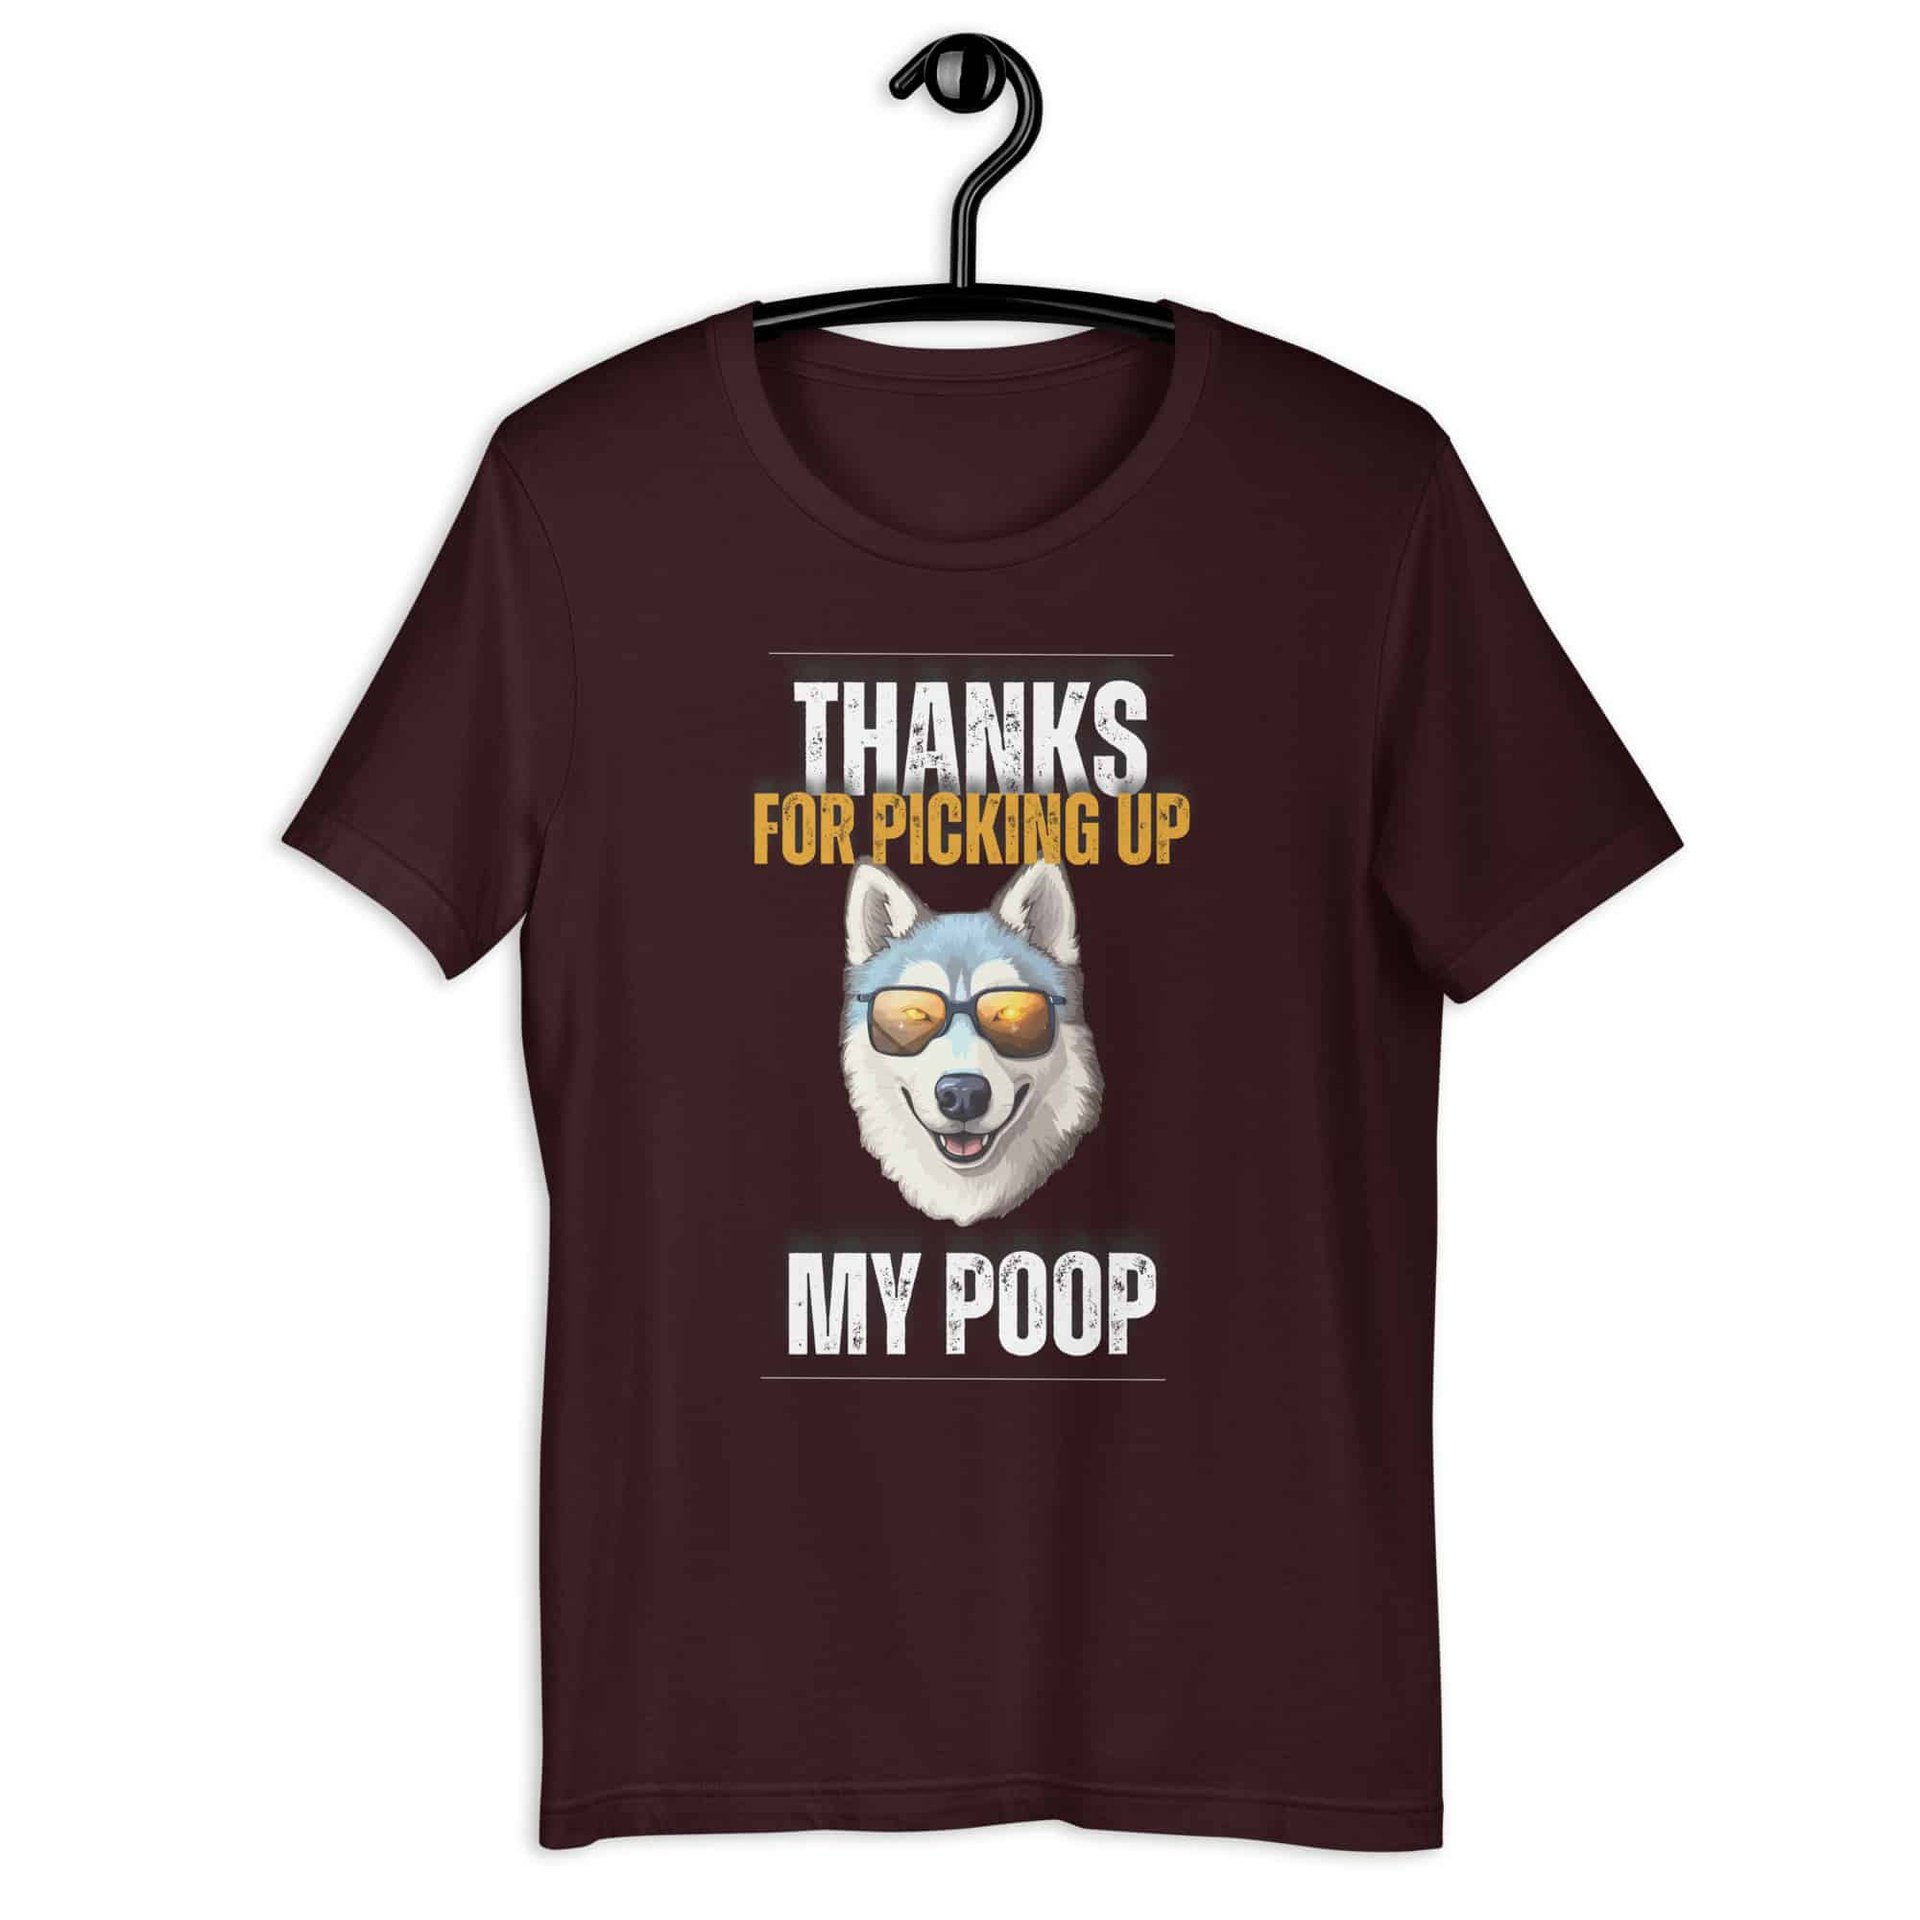 Thanks For Picking Up My POOP Funny Huskies Unisex T-Shirt. Oxblood Black